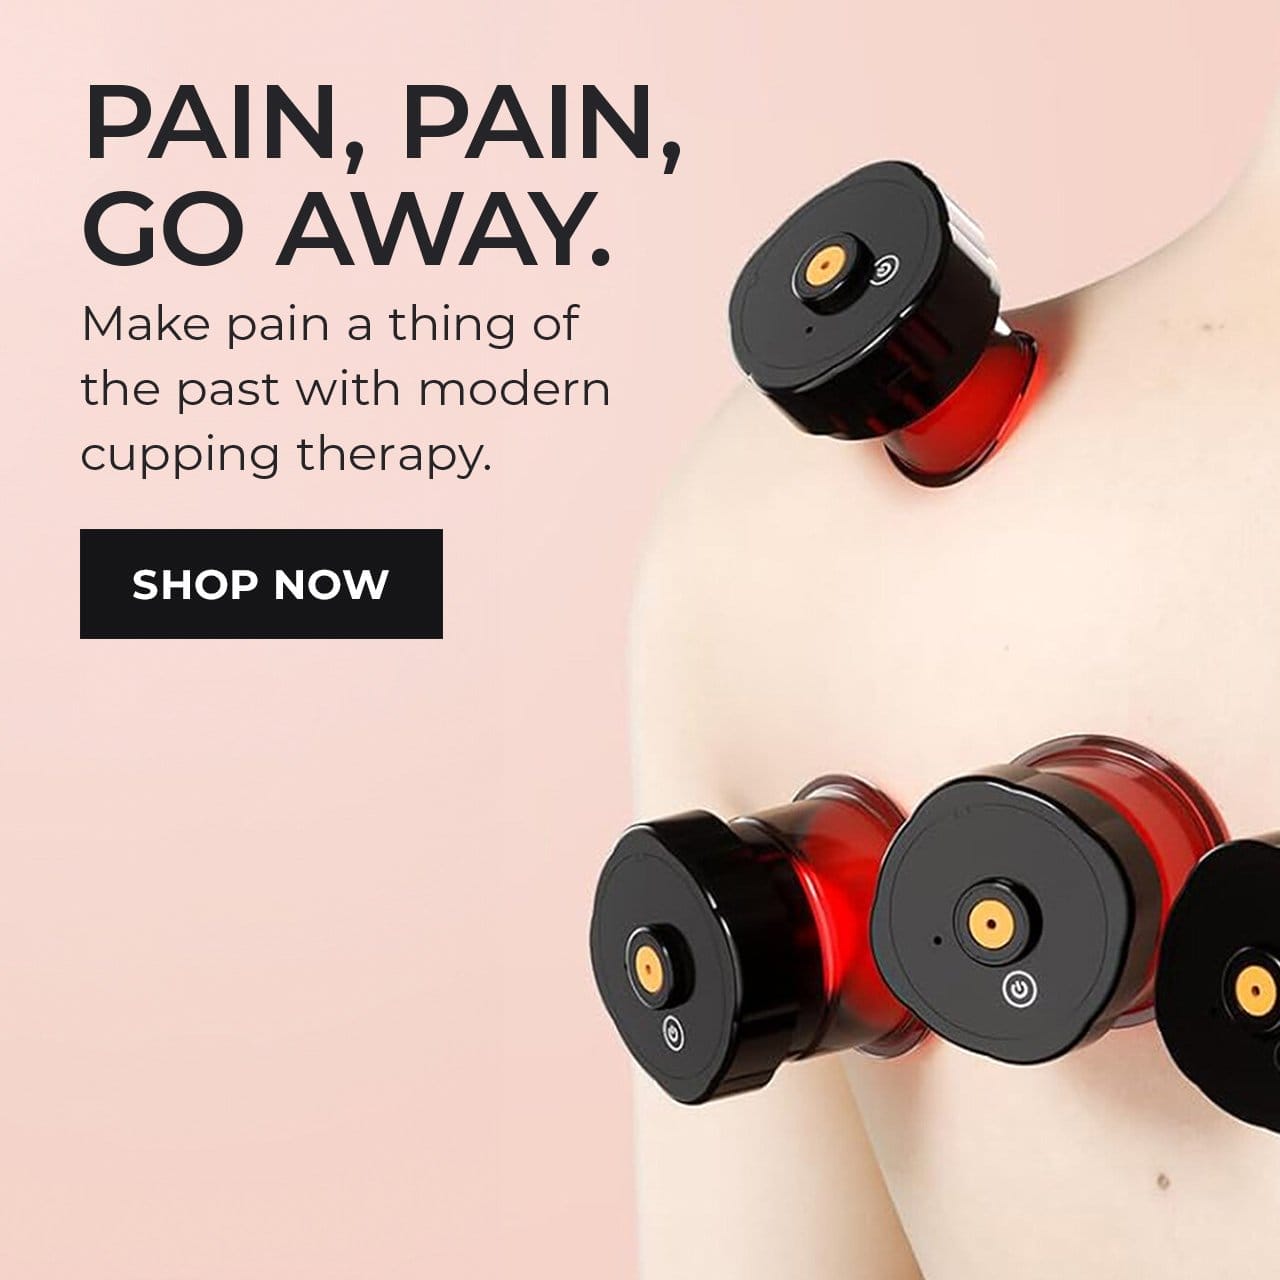 Smart Cupping Set | SHOP NOW